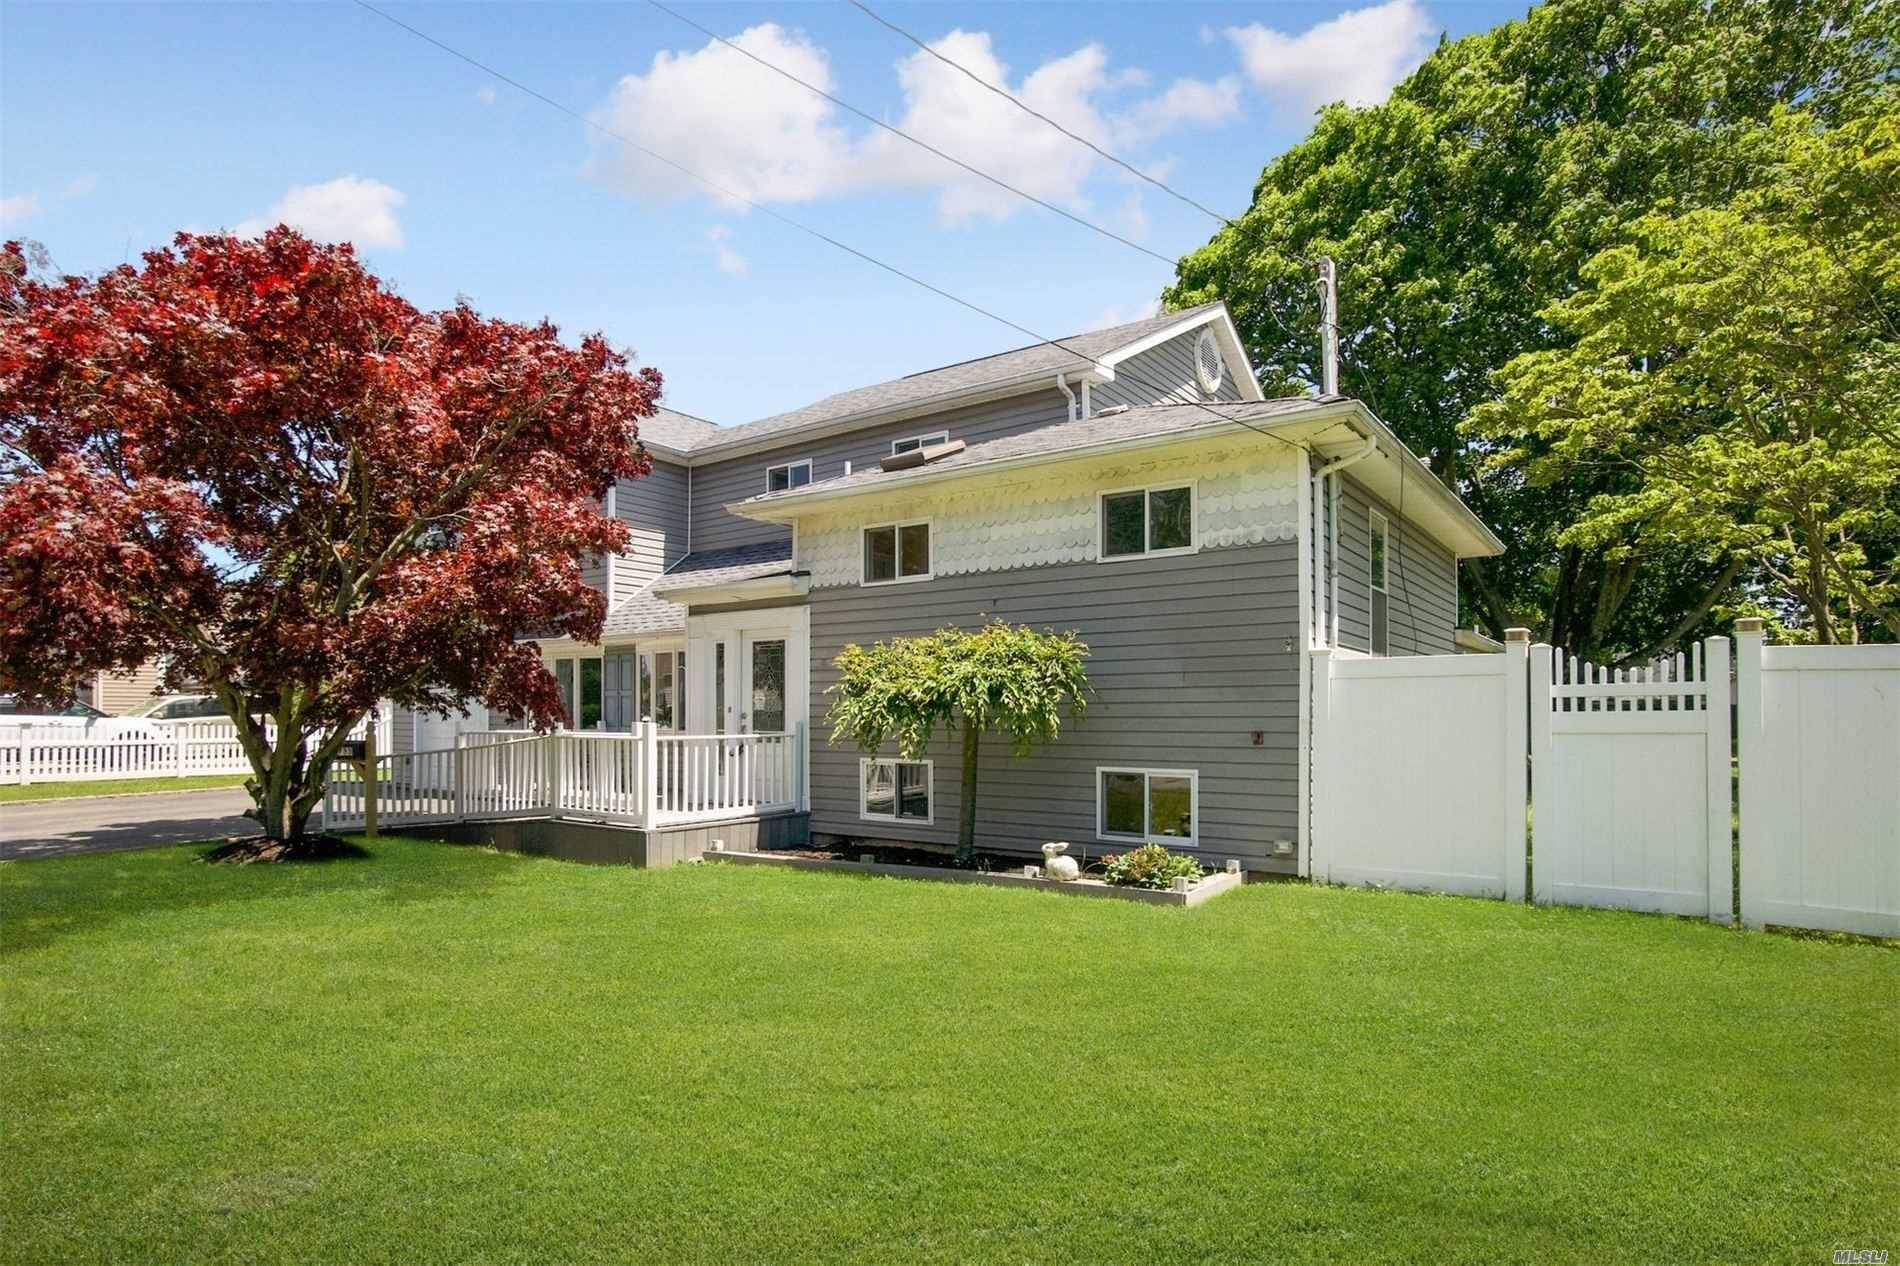 Elegantly Renovated Split With SS Appliances, Hard Wood Floors In Bedroom, Dining Room, And Living Room, And A Spacious Backyard With A Deck And An In Ground Pool Just Perfect ...